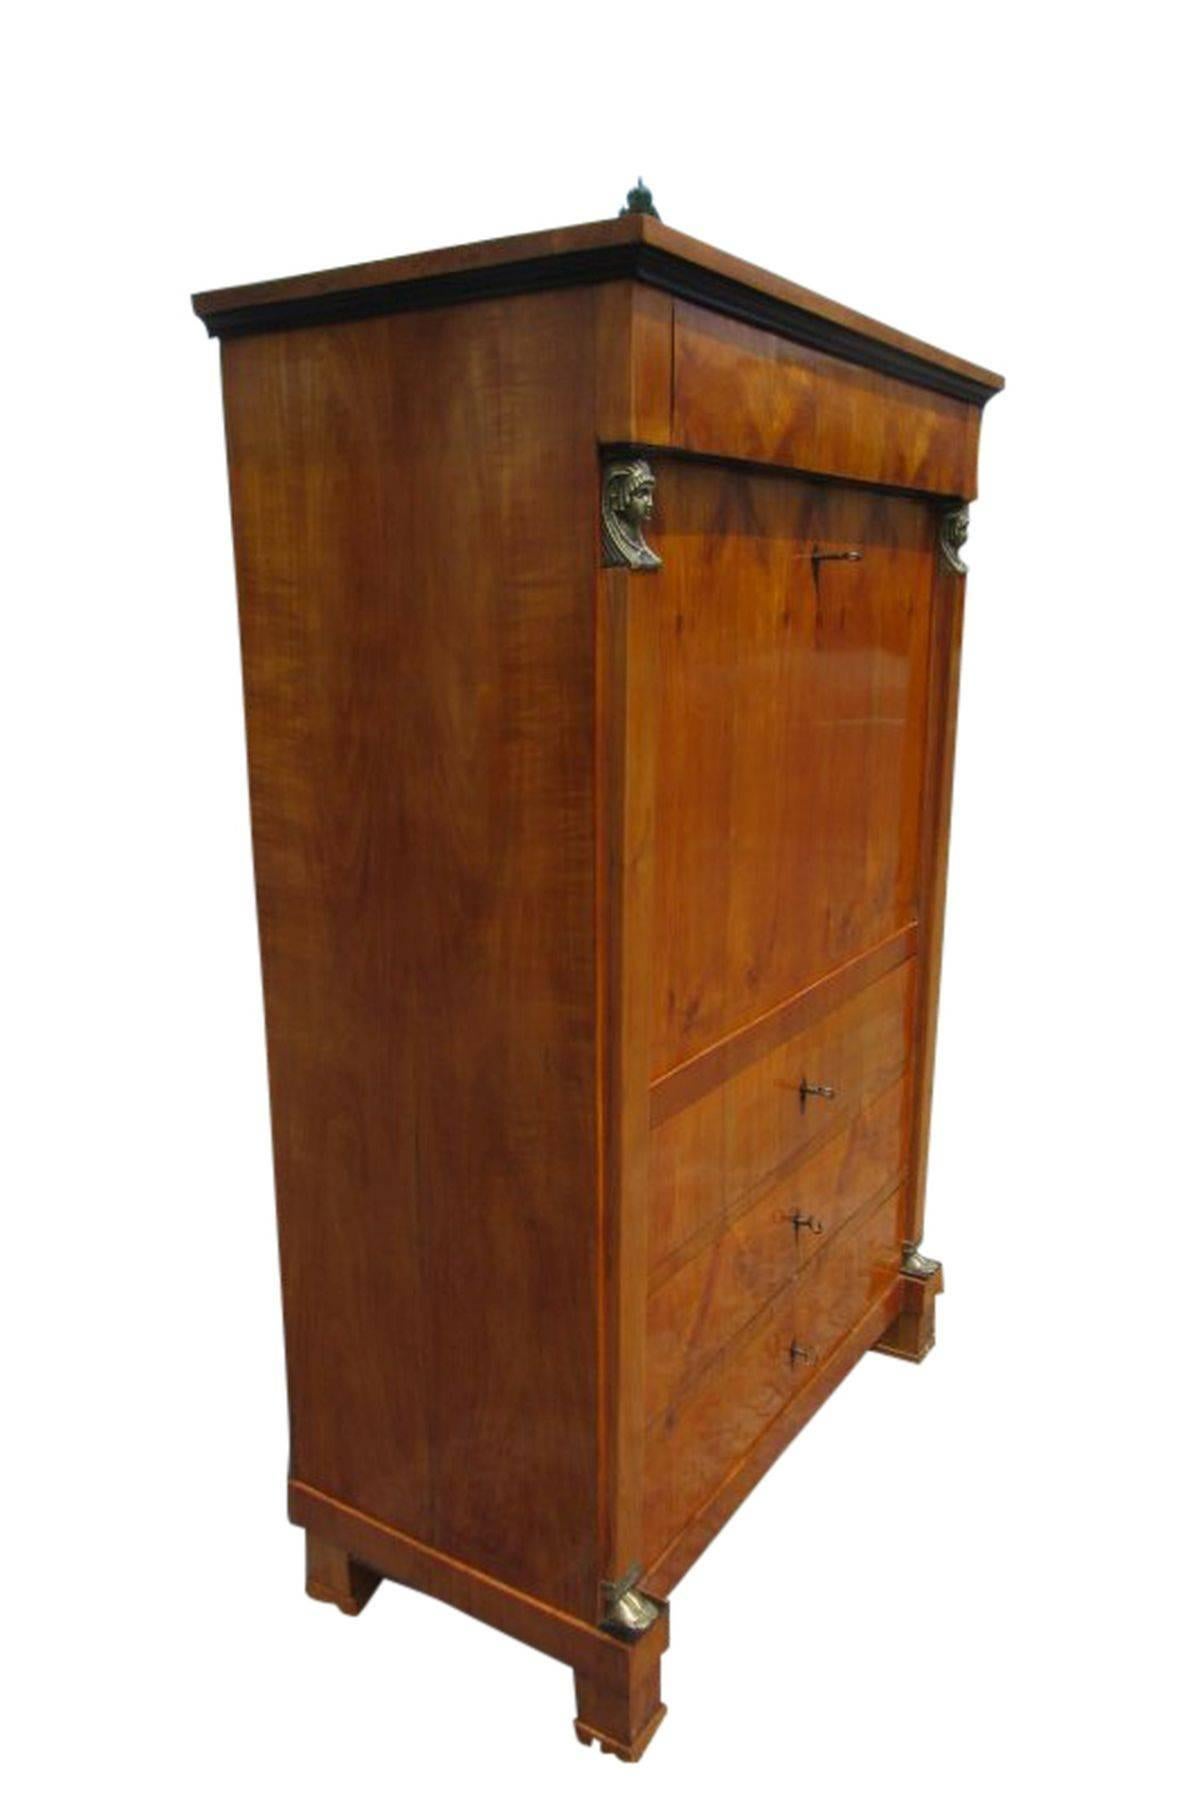 Biedermeier secretary made of cherrywood. It has a big interior with 11 small drawers and four big drawers. The intelligent design has a lot of use and looks wonderful. The woman's heads on both side create are made of brass and create a unique